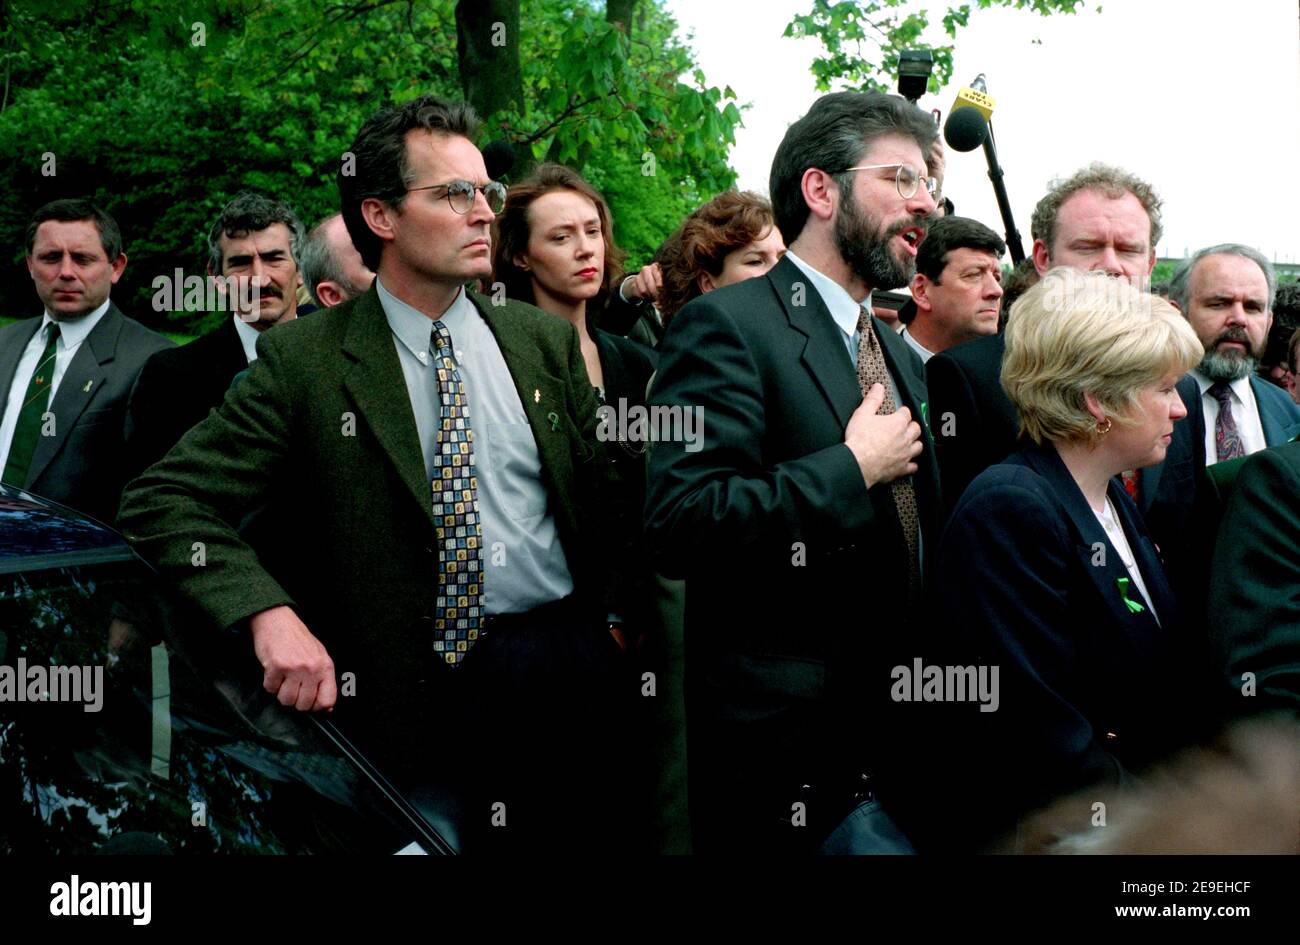 Northern Ireland Peace Talks in Belfast June 1996 Showing Sinn Fein Leaders Gerry Adams and Martin McGuinness and Gerry Kelly who were all excluded from the Stormont peace negotiations at the time. Stock Photo